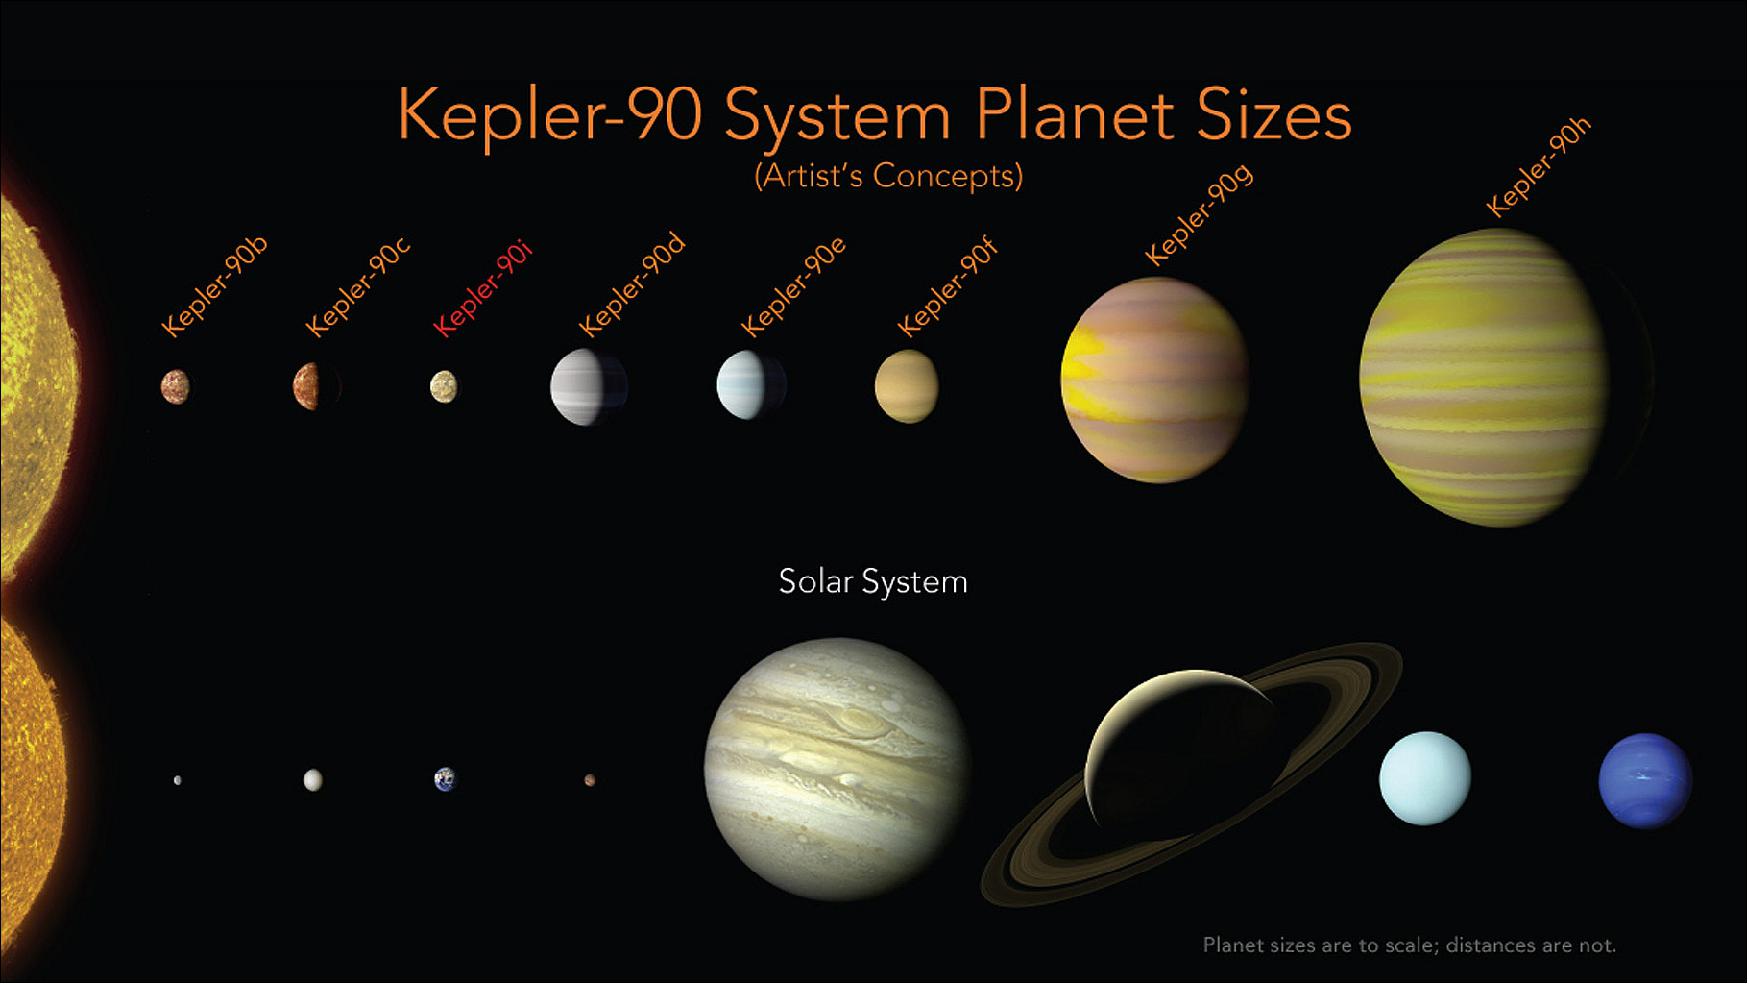 Figure 35: With the discovery of an eighth planet, the Kepler-90 system is the first to tie with our solar system in number of planets. Artist's concept (image credit: NASA/Ames Research Center/Wendy Stenzel) 62)